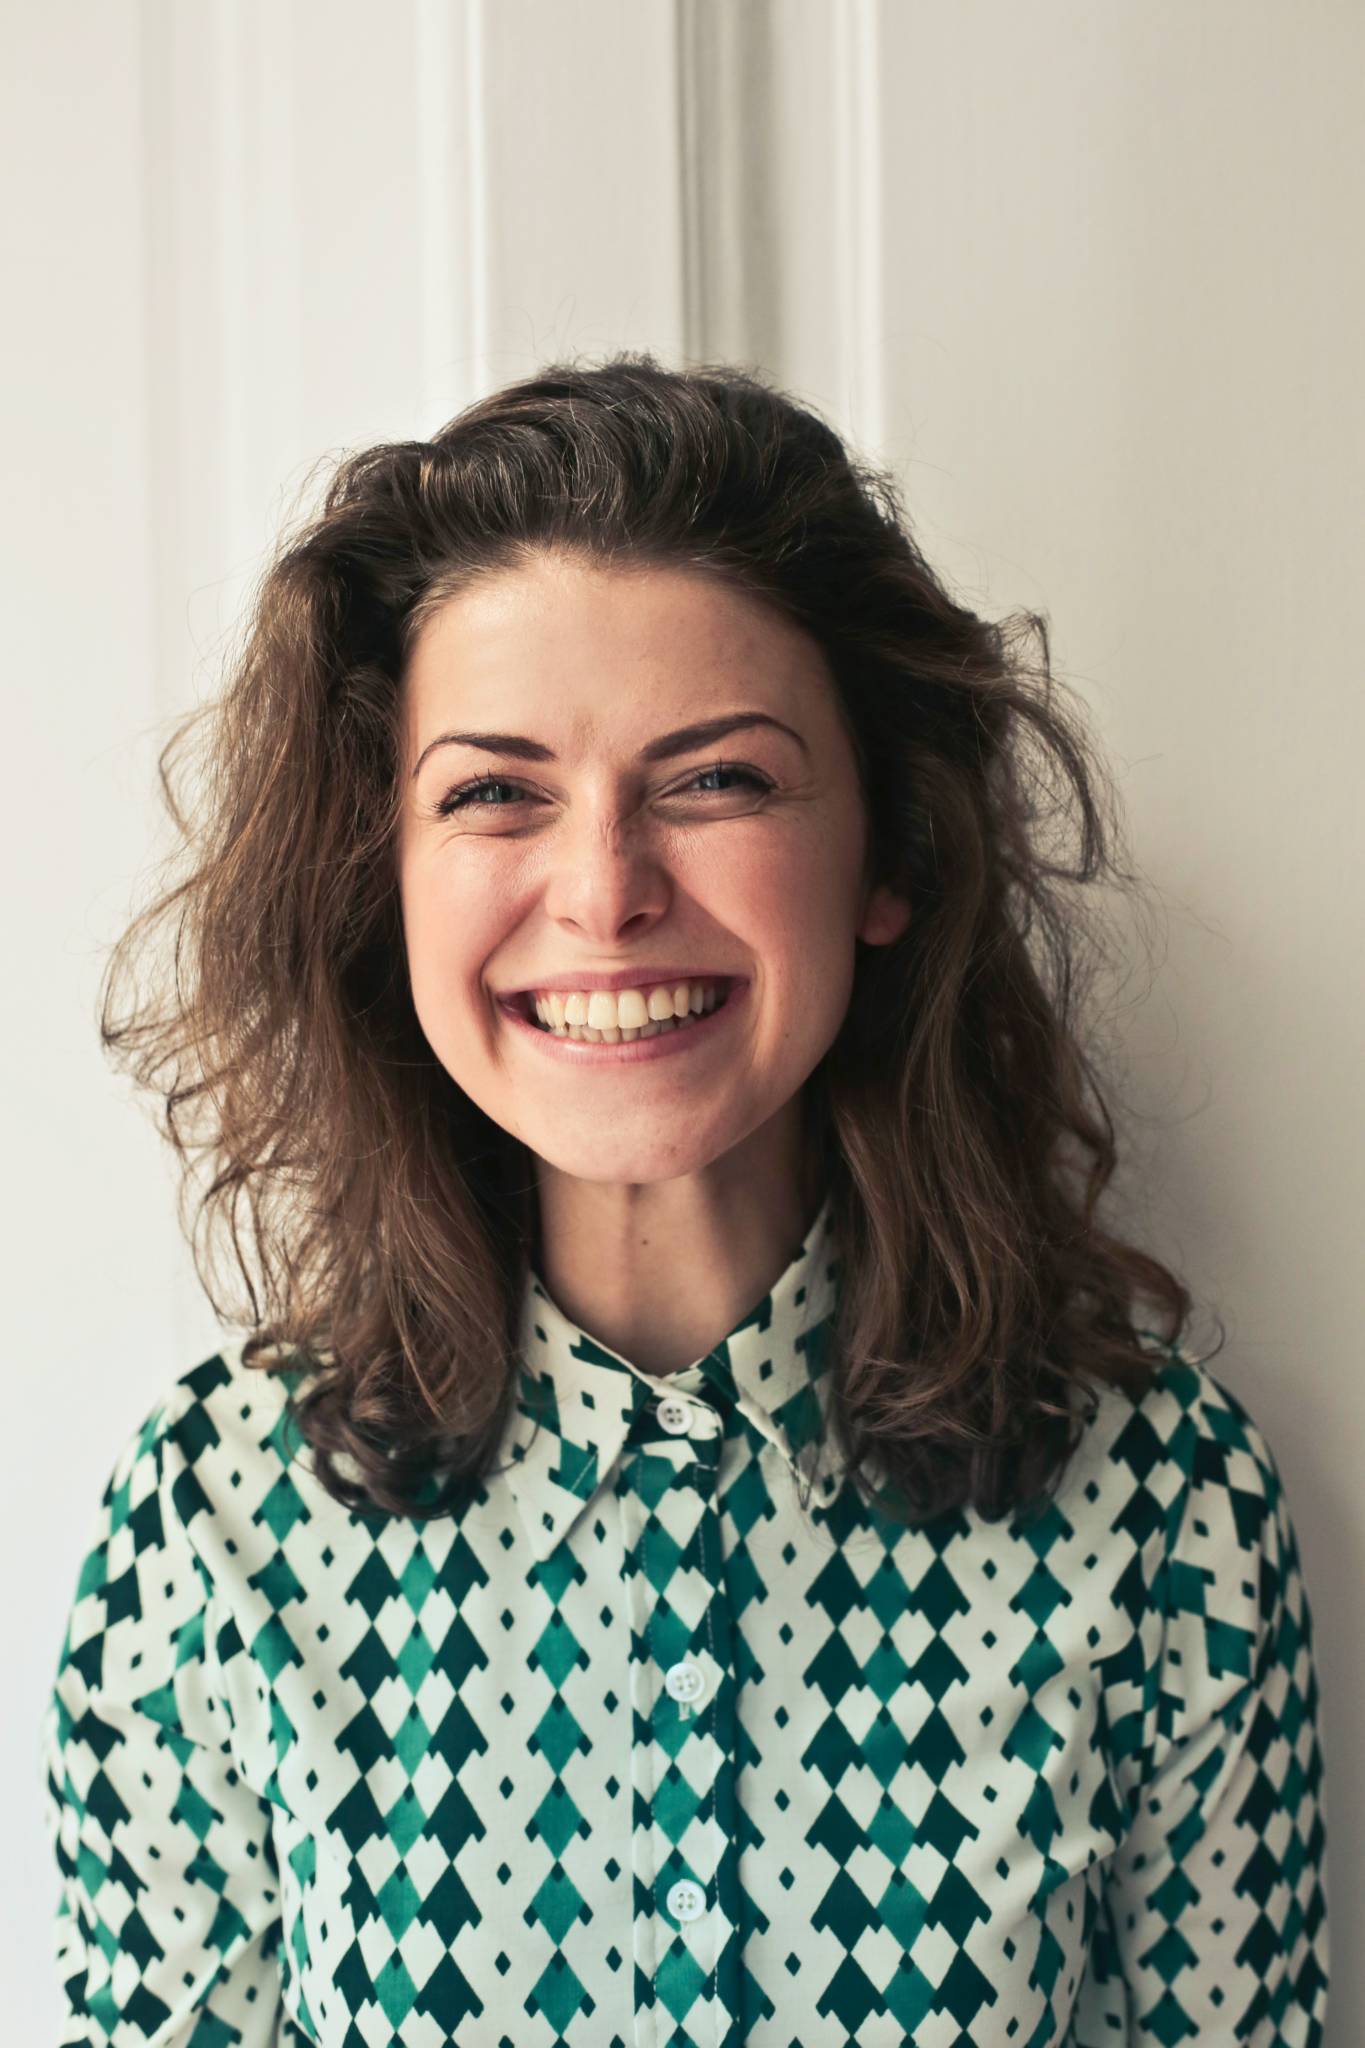 woman with curly hair in patterned shirt grinning